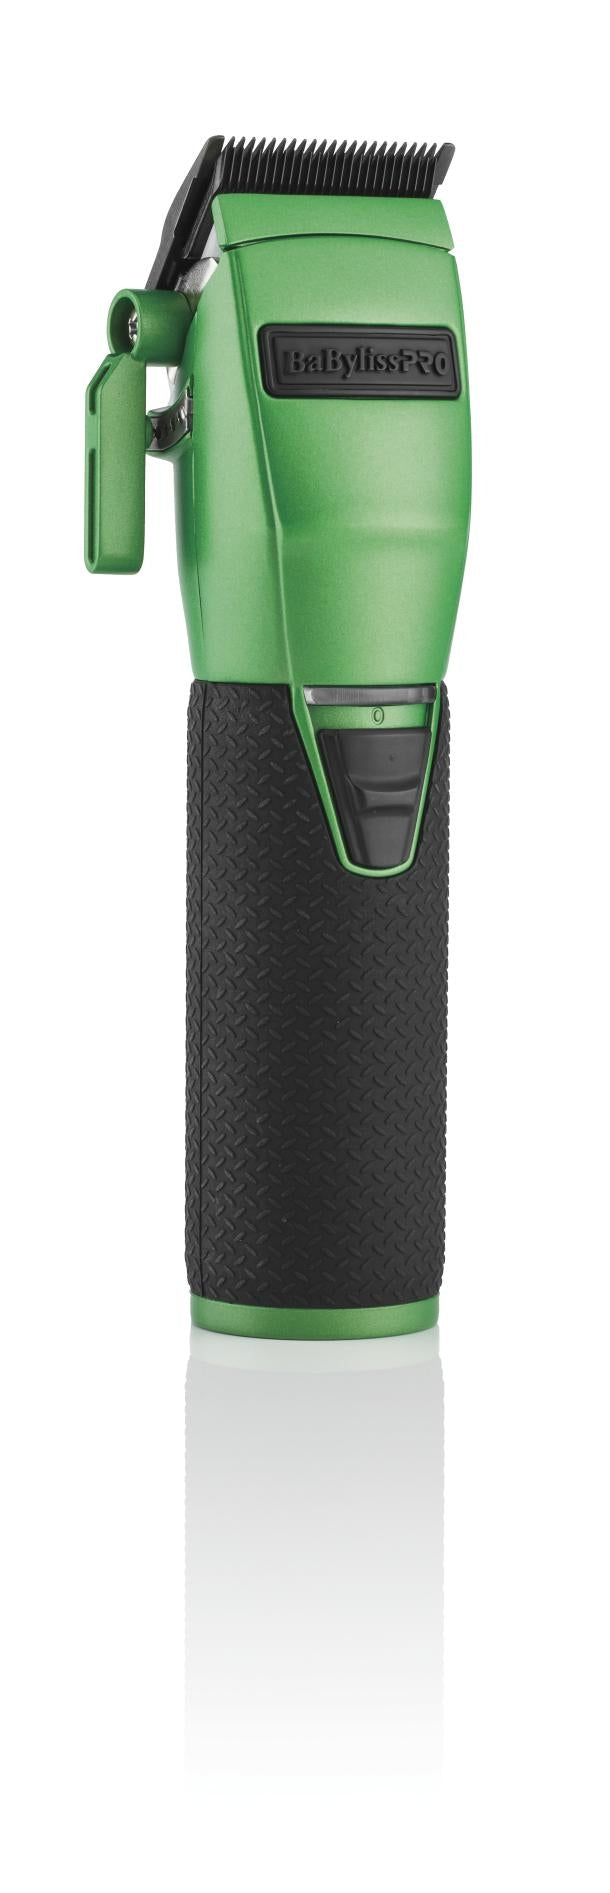 PRO Green FX Cordless Clipper - Limited